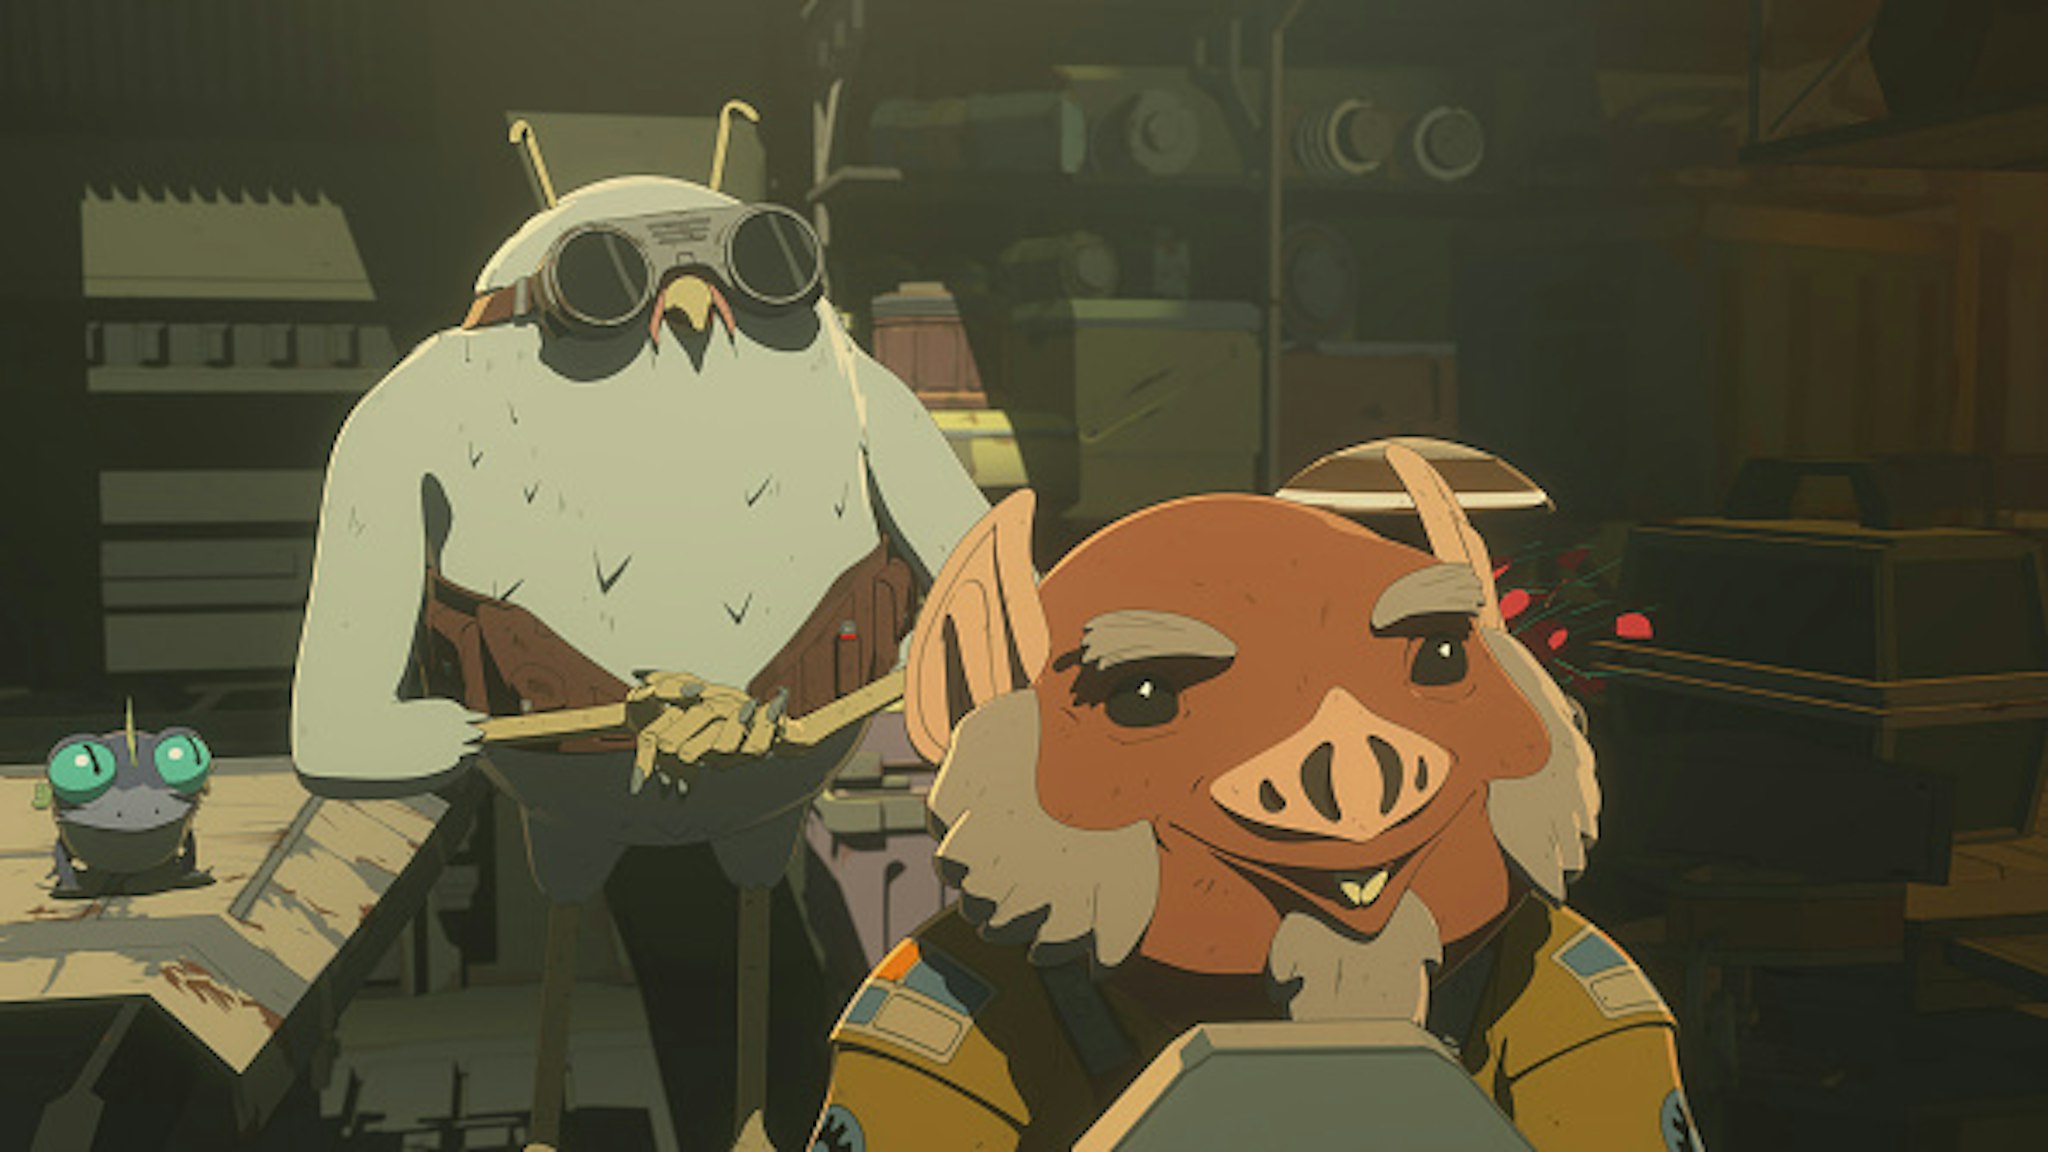 STAR WARS RESISTANCE - "Dangerous Business" - In exchange for parts, Kaz minds acquisitions for Flix and Orka and comes into conflict with a shady alien customer in league with the First Order. This episode of "Star Wars Resistance" airs Sunday, Jan. 20 (10:00 - 10:30 P.M. EST) on Disney Channel.